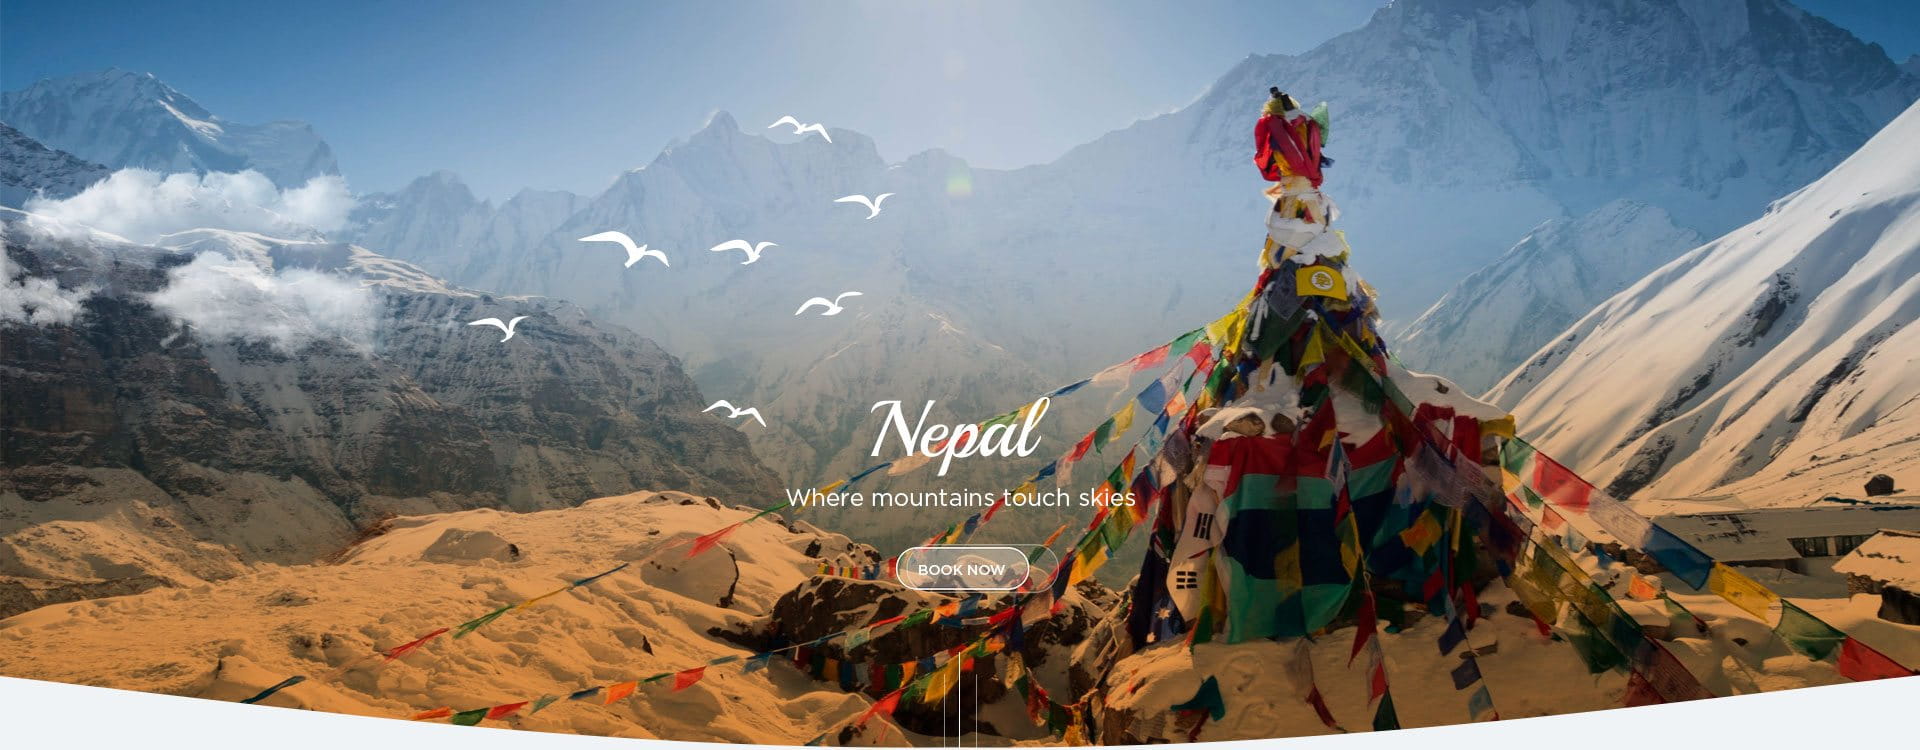 Nepal Tour and Travel agency - Eastern Meadows Tour